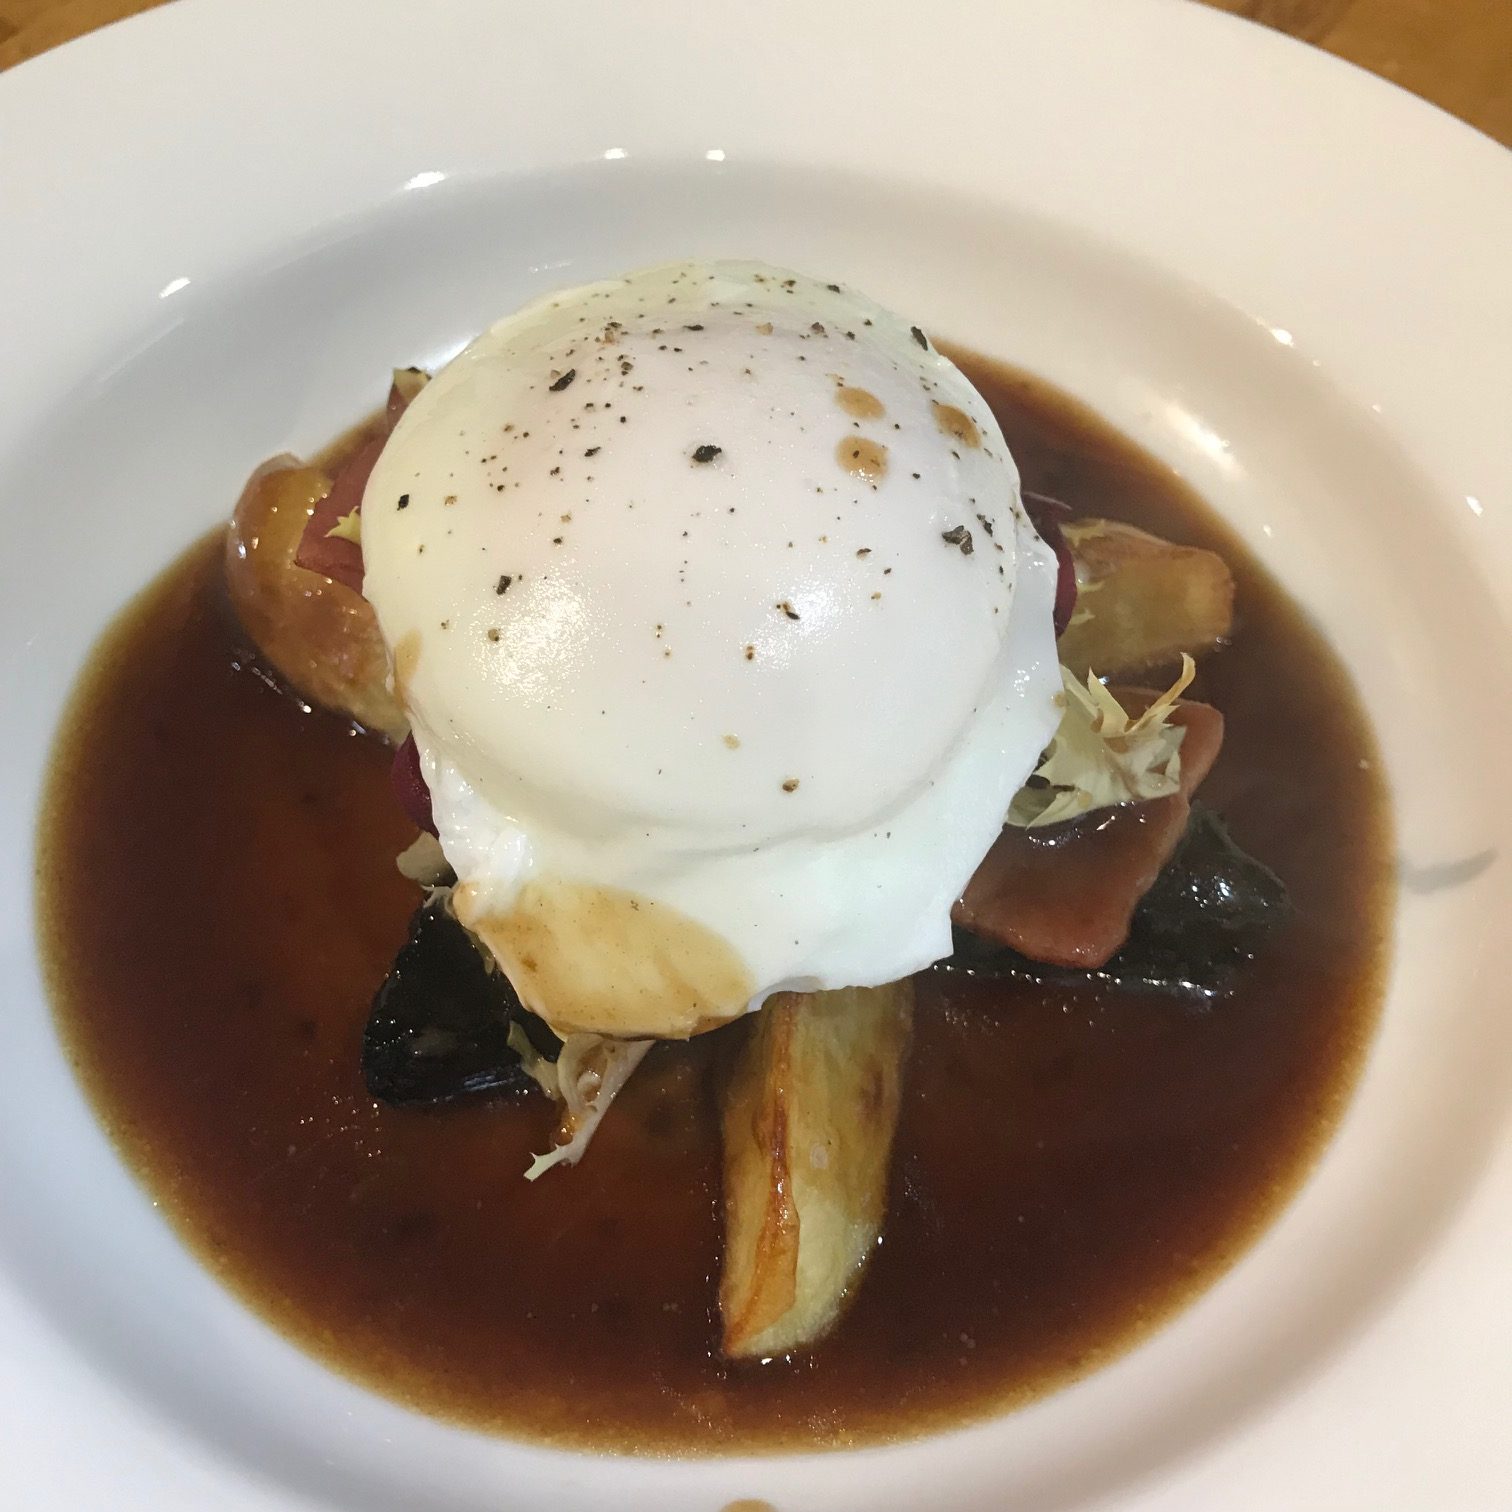 20190829 - Poached Egg, Bacon & Black Pudding Salad with Red Wine Sauce